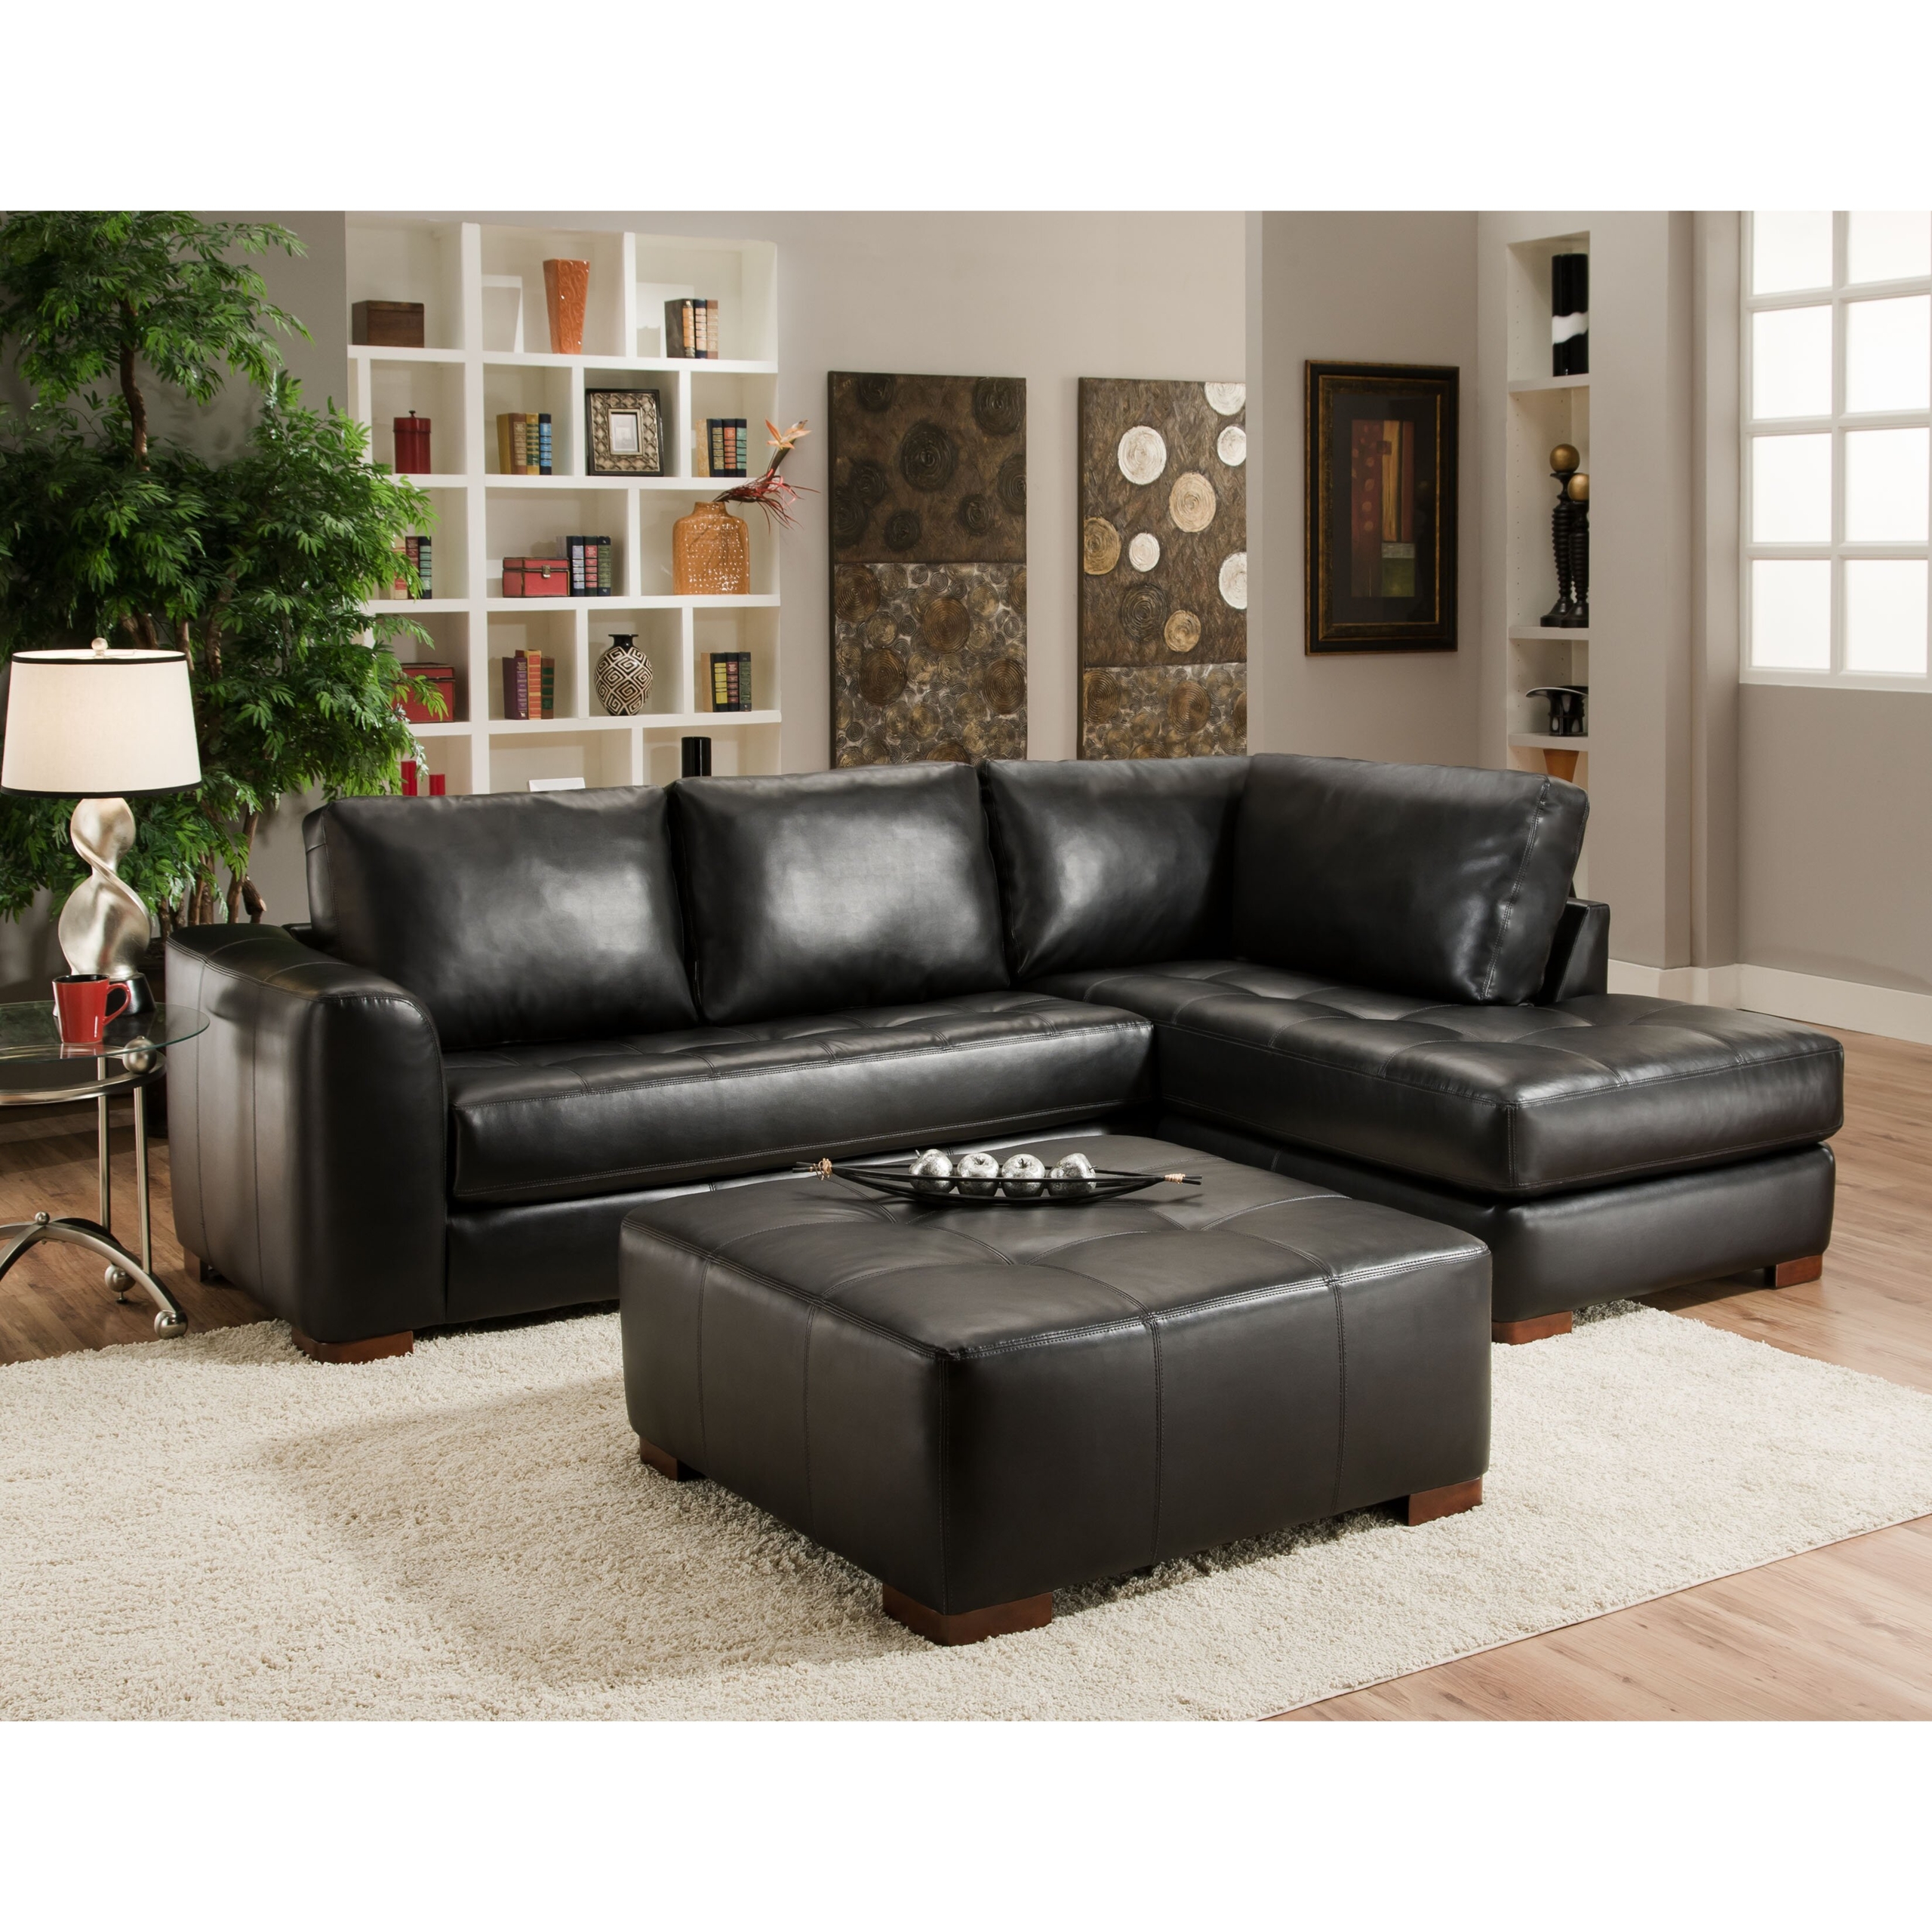 Small leather sofa with chaise